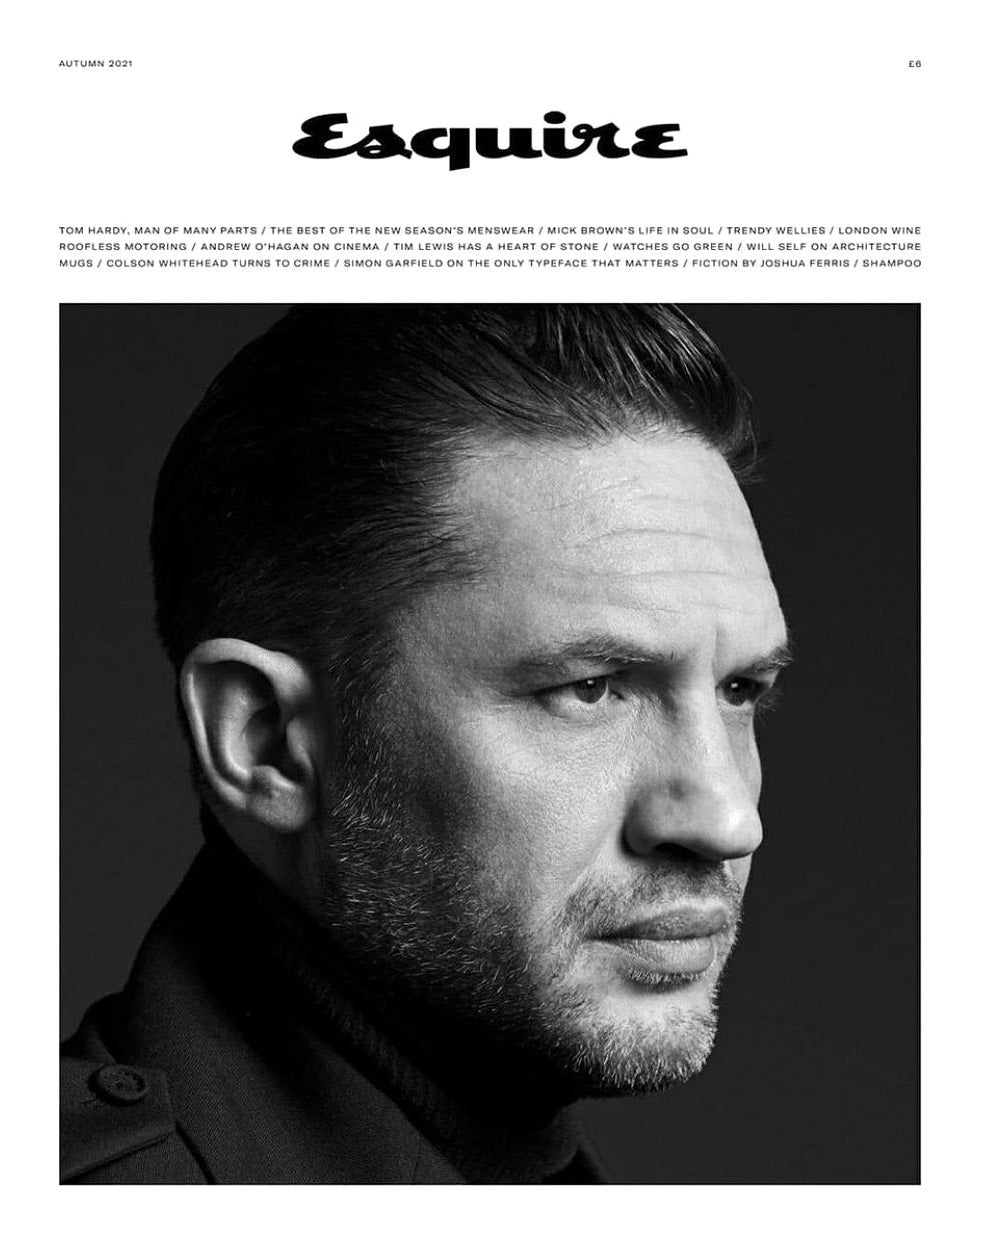 Tom Hardy for Esquire UK - Autumn 2021